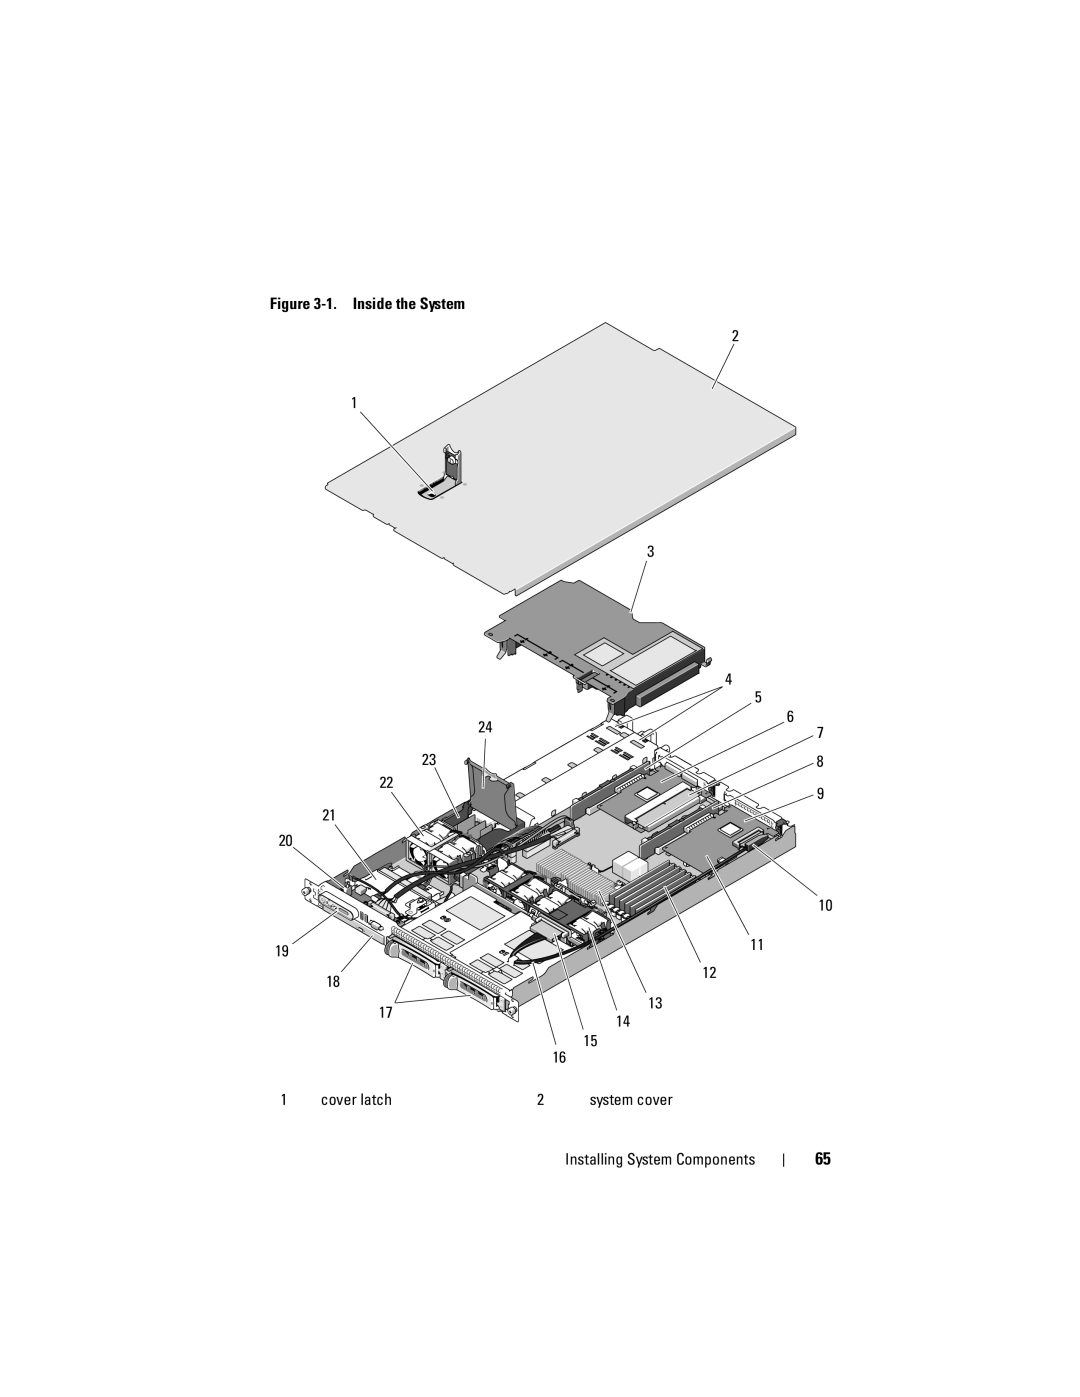 Dell R300 owner manual 1. Inside the System, cover latch, system cover, Installing System Components 